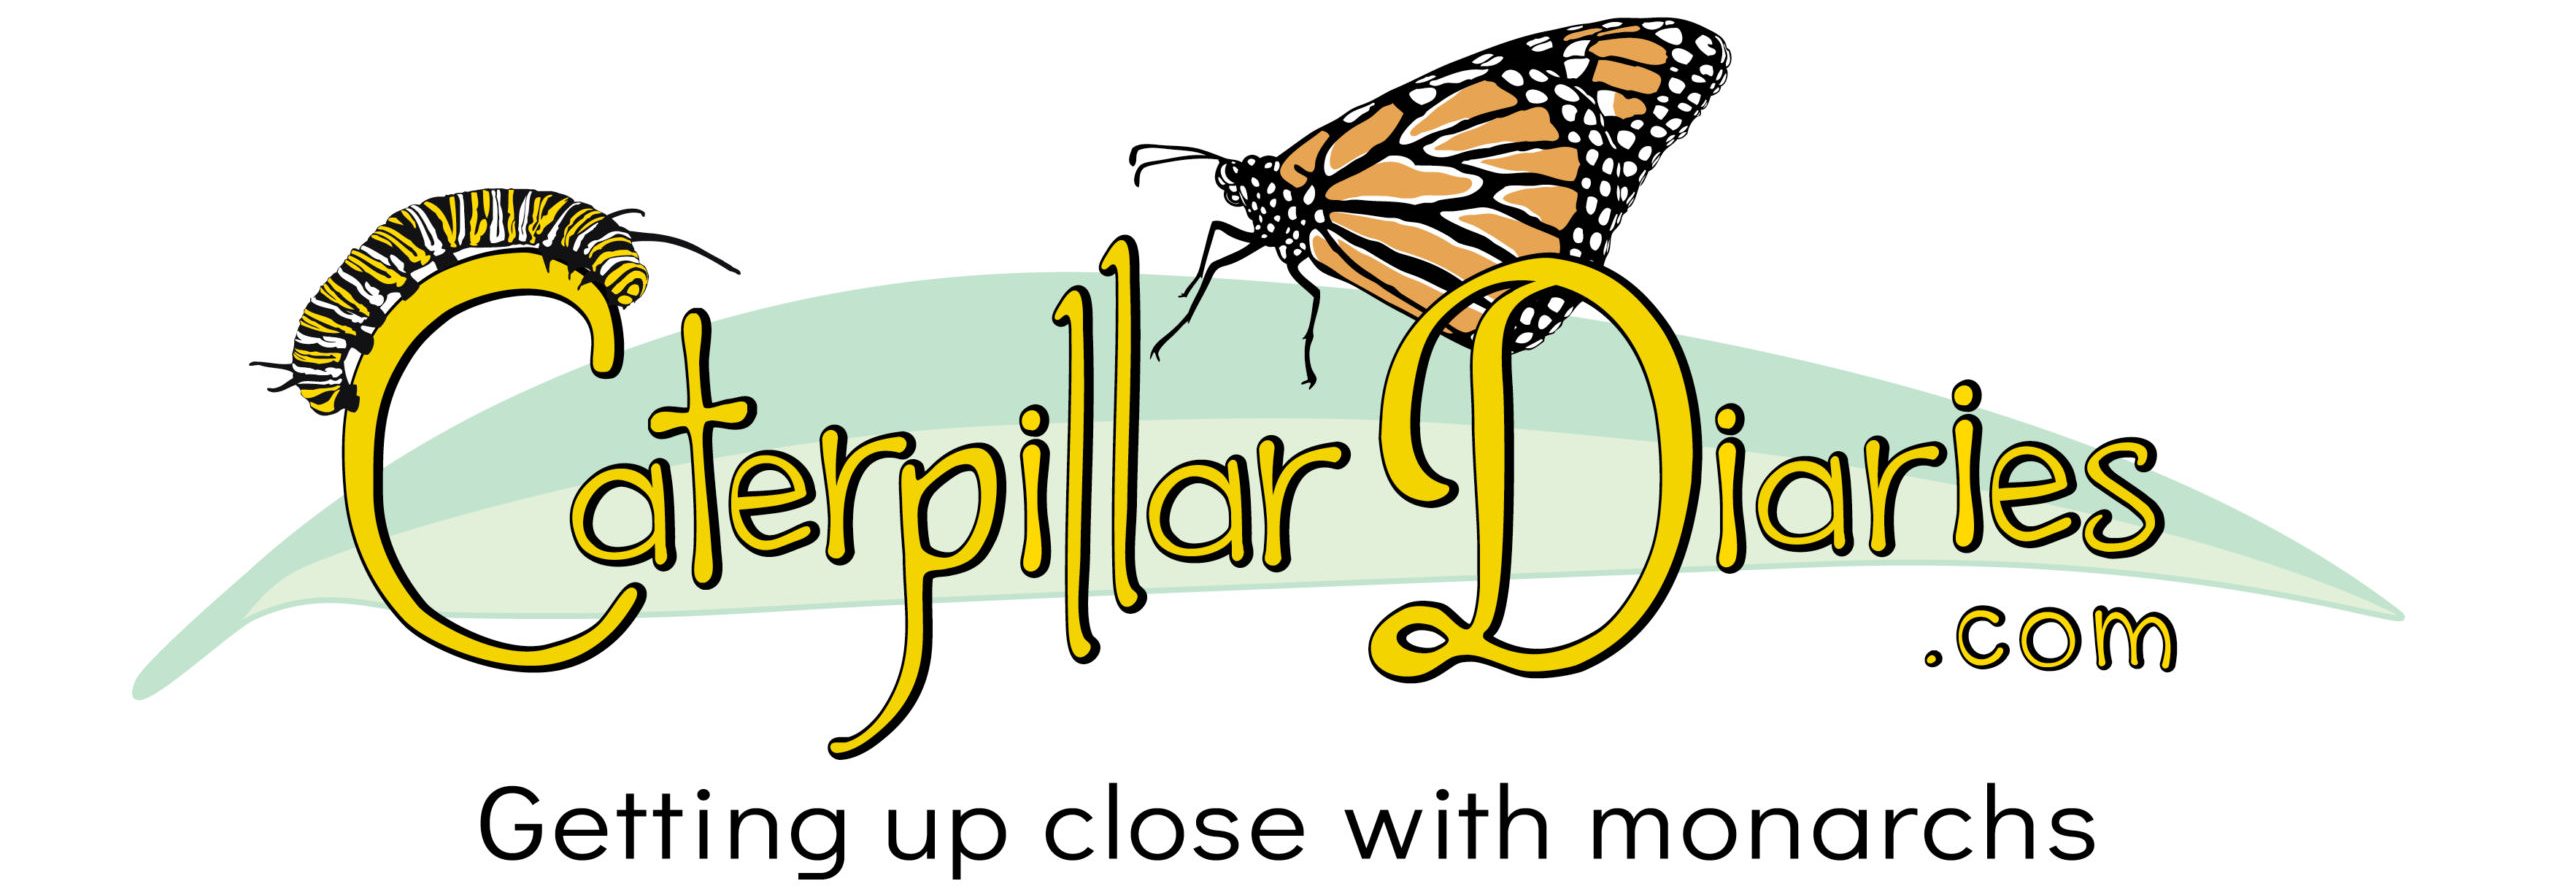 The logo for Caterpillar Diaries featuring a caterpillar, a monarch butterfly, and the words Caterpillar Diaries.com Getting up close with monarchs